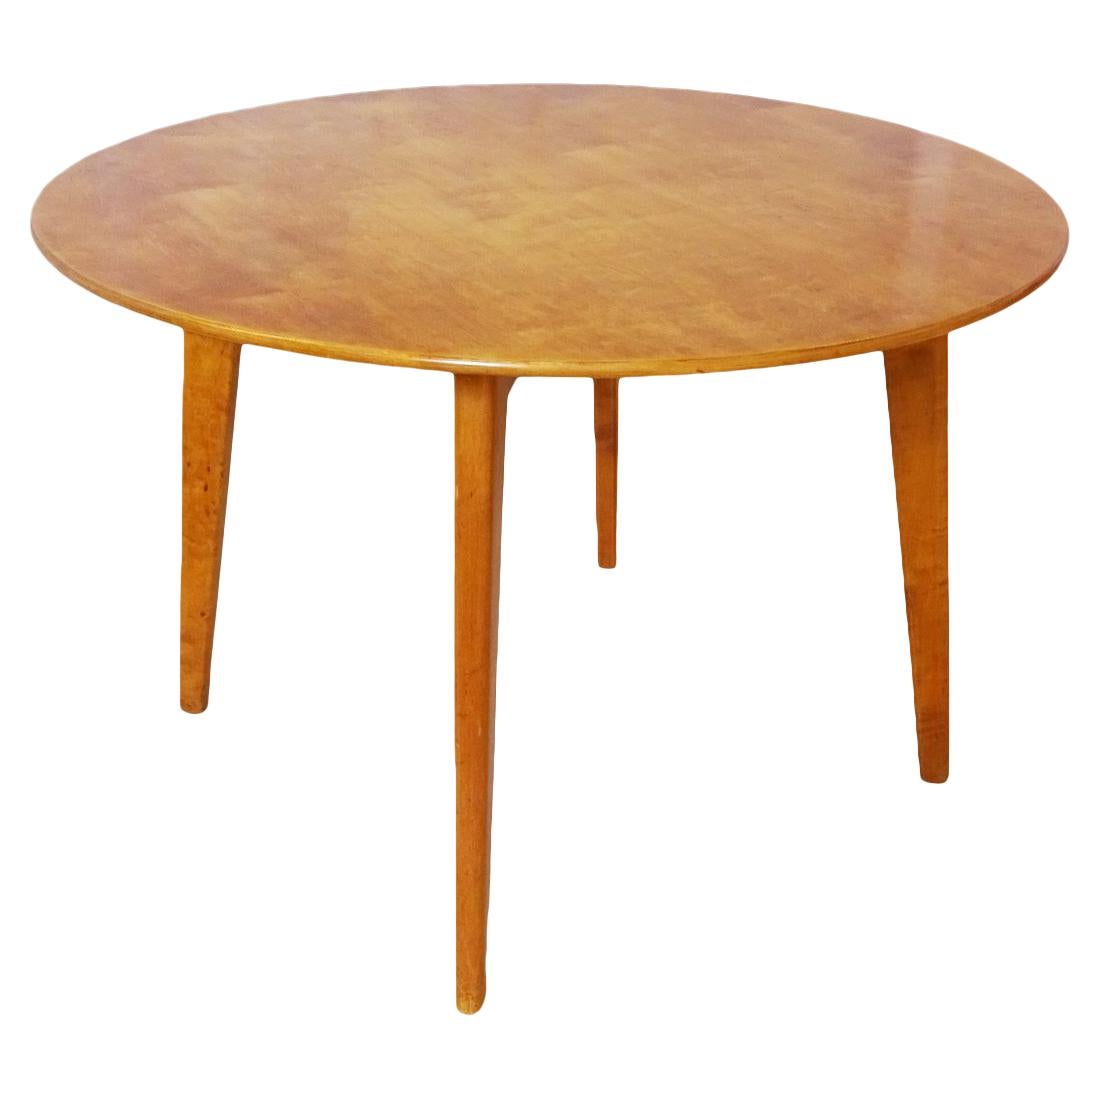 Midcentury Coffee or Centre Table, Cherrywood